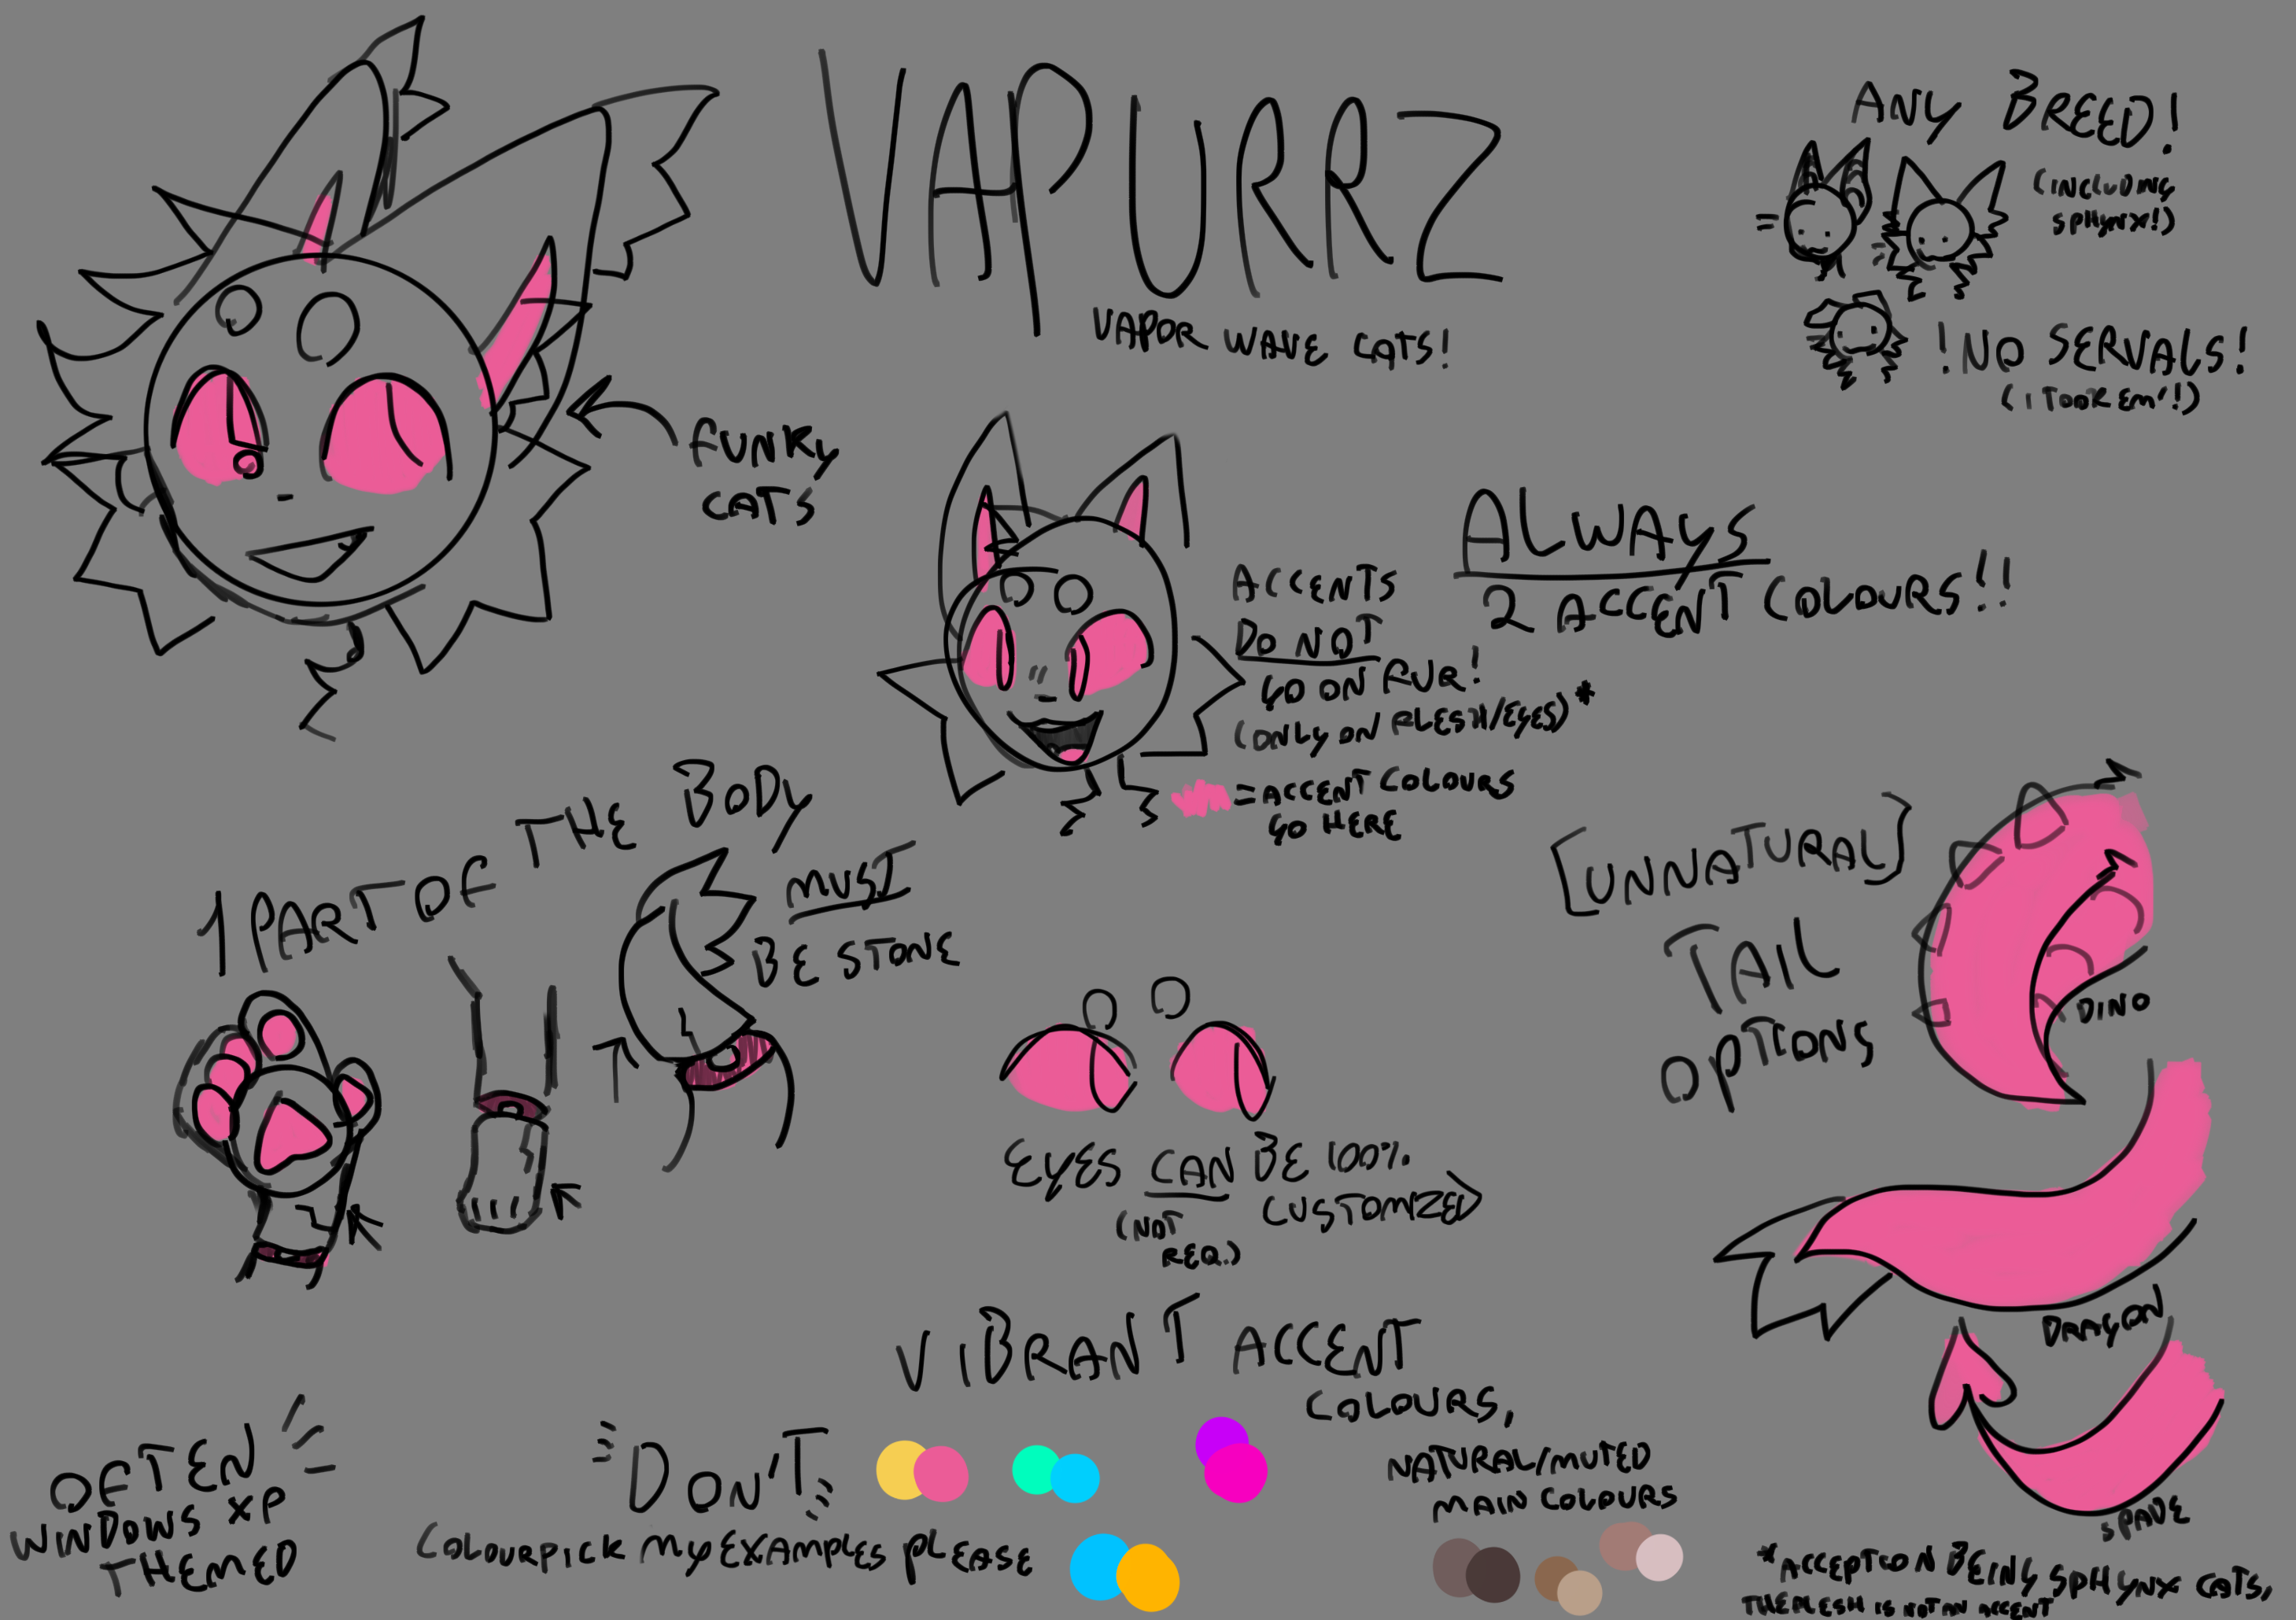 Species reference sheet